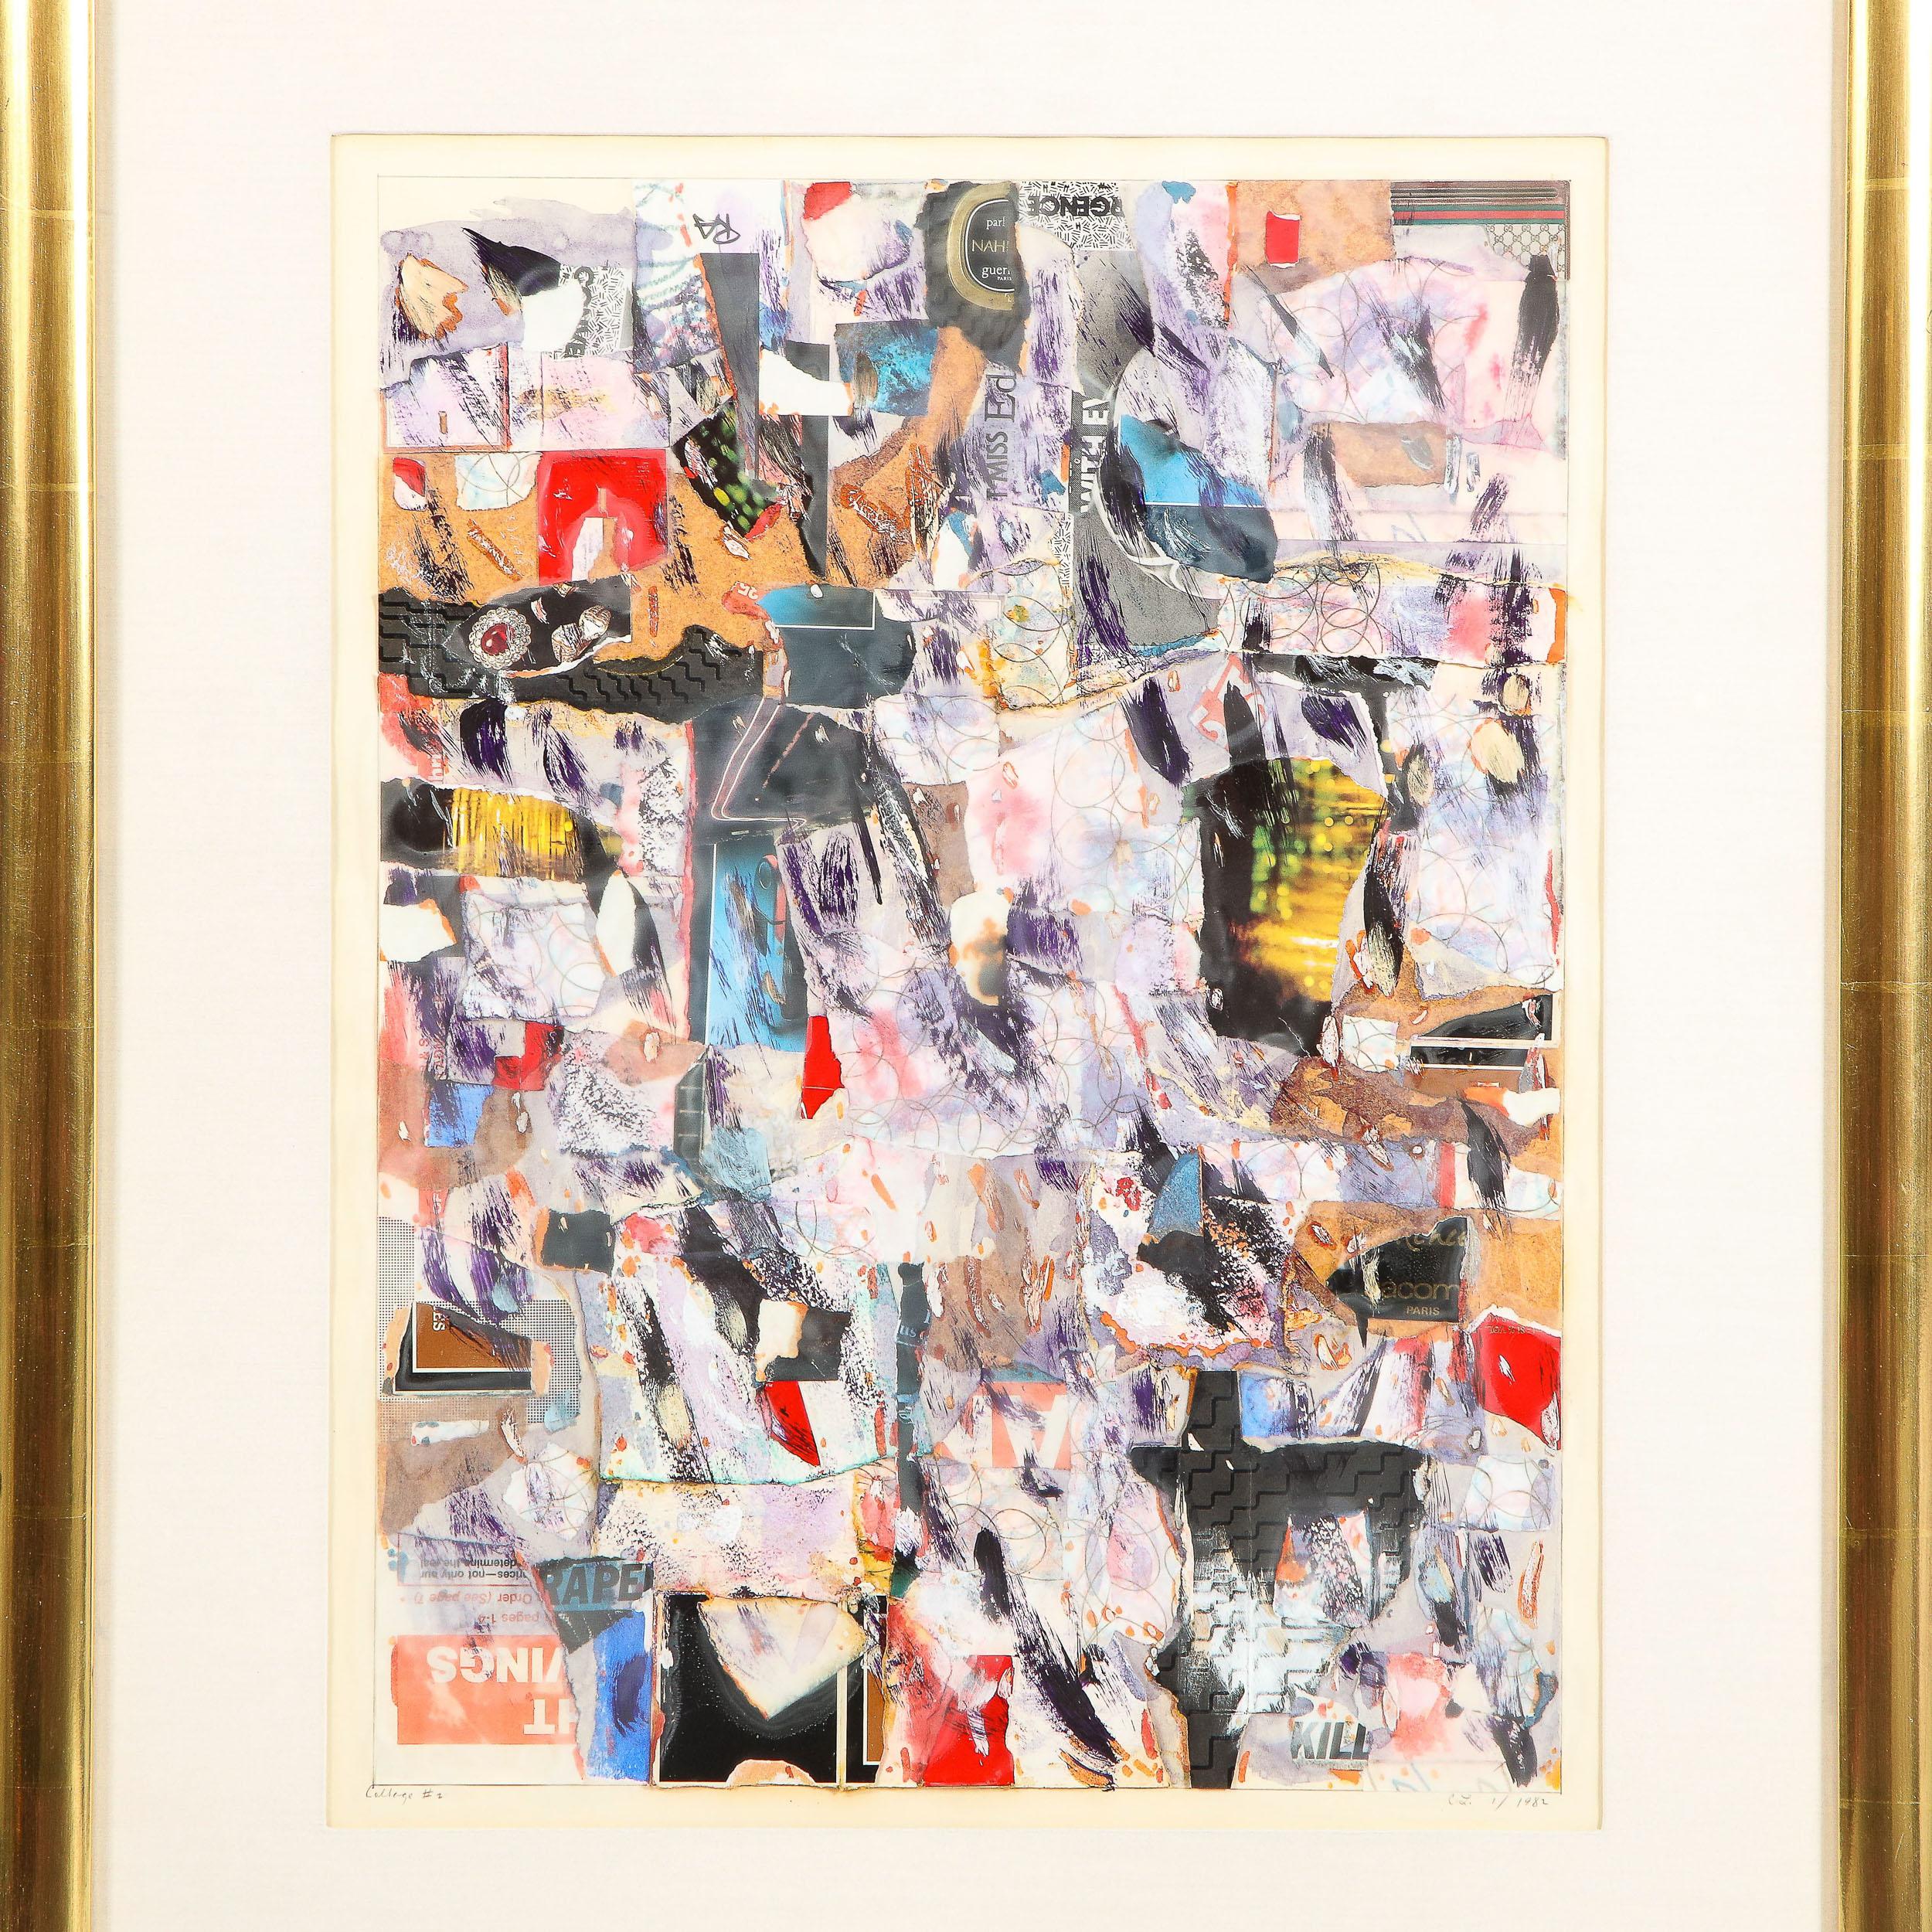 This sophisticated modernist mixed media collage was realized in 1982. It offers various fragments of paper, including advertisements and a ruby and diamond ring patched together to create a mosaic brimming with life, texture and color. Dynamic,